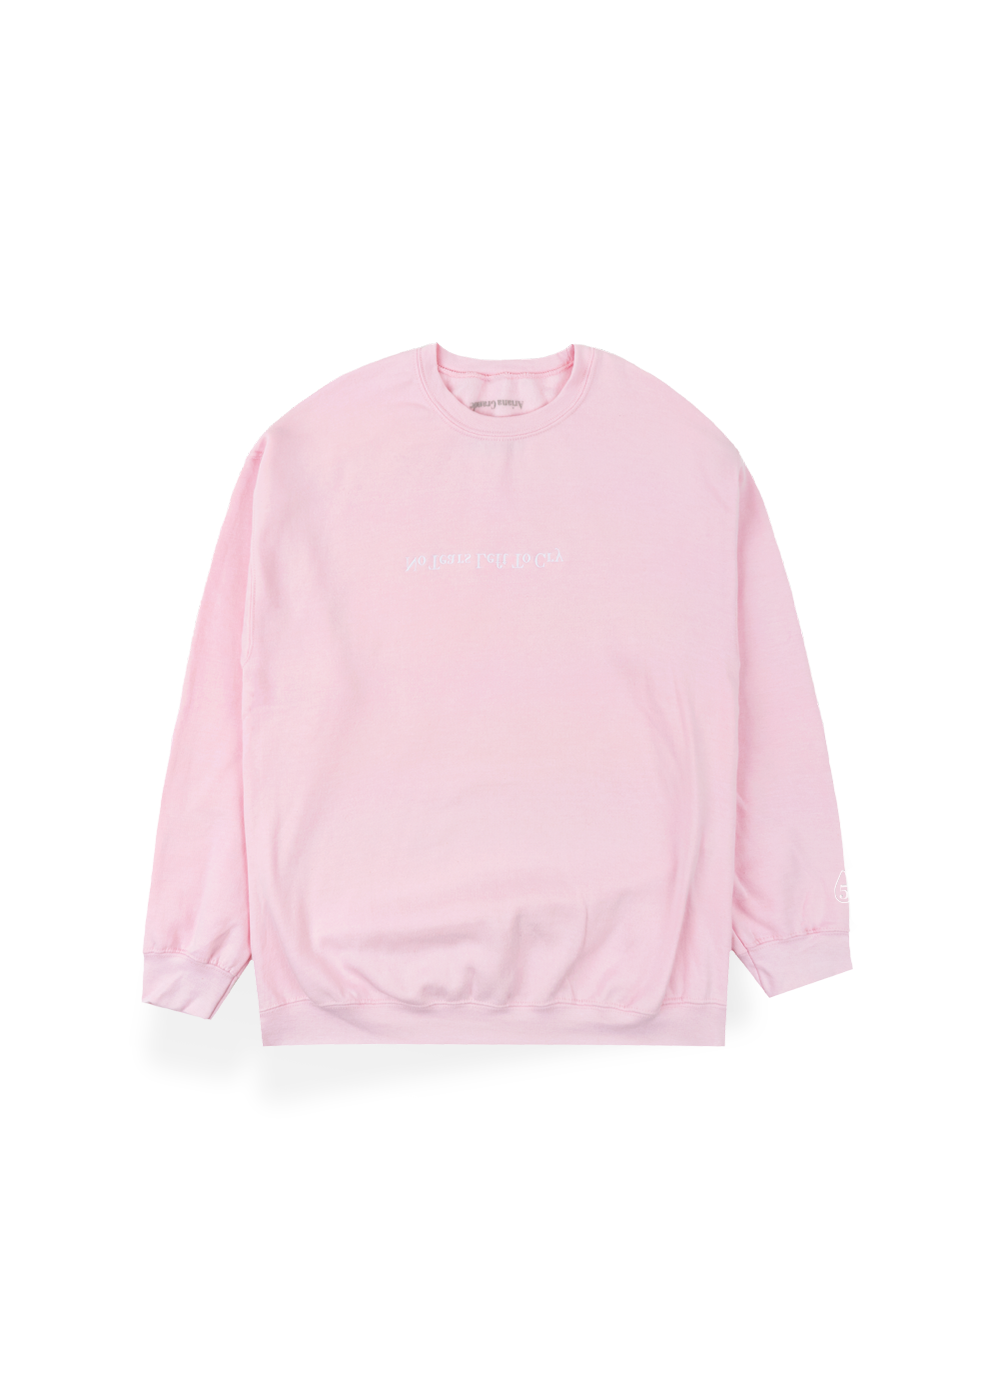 no tears left to cry 5 year anniversary crewneck